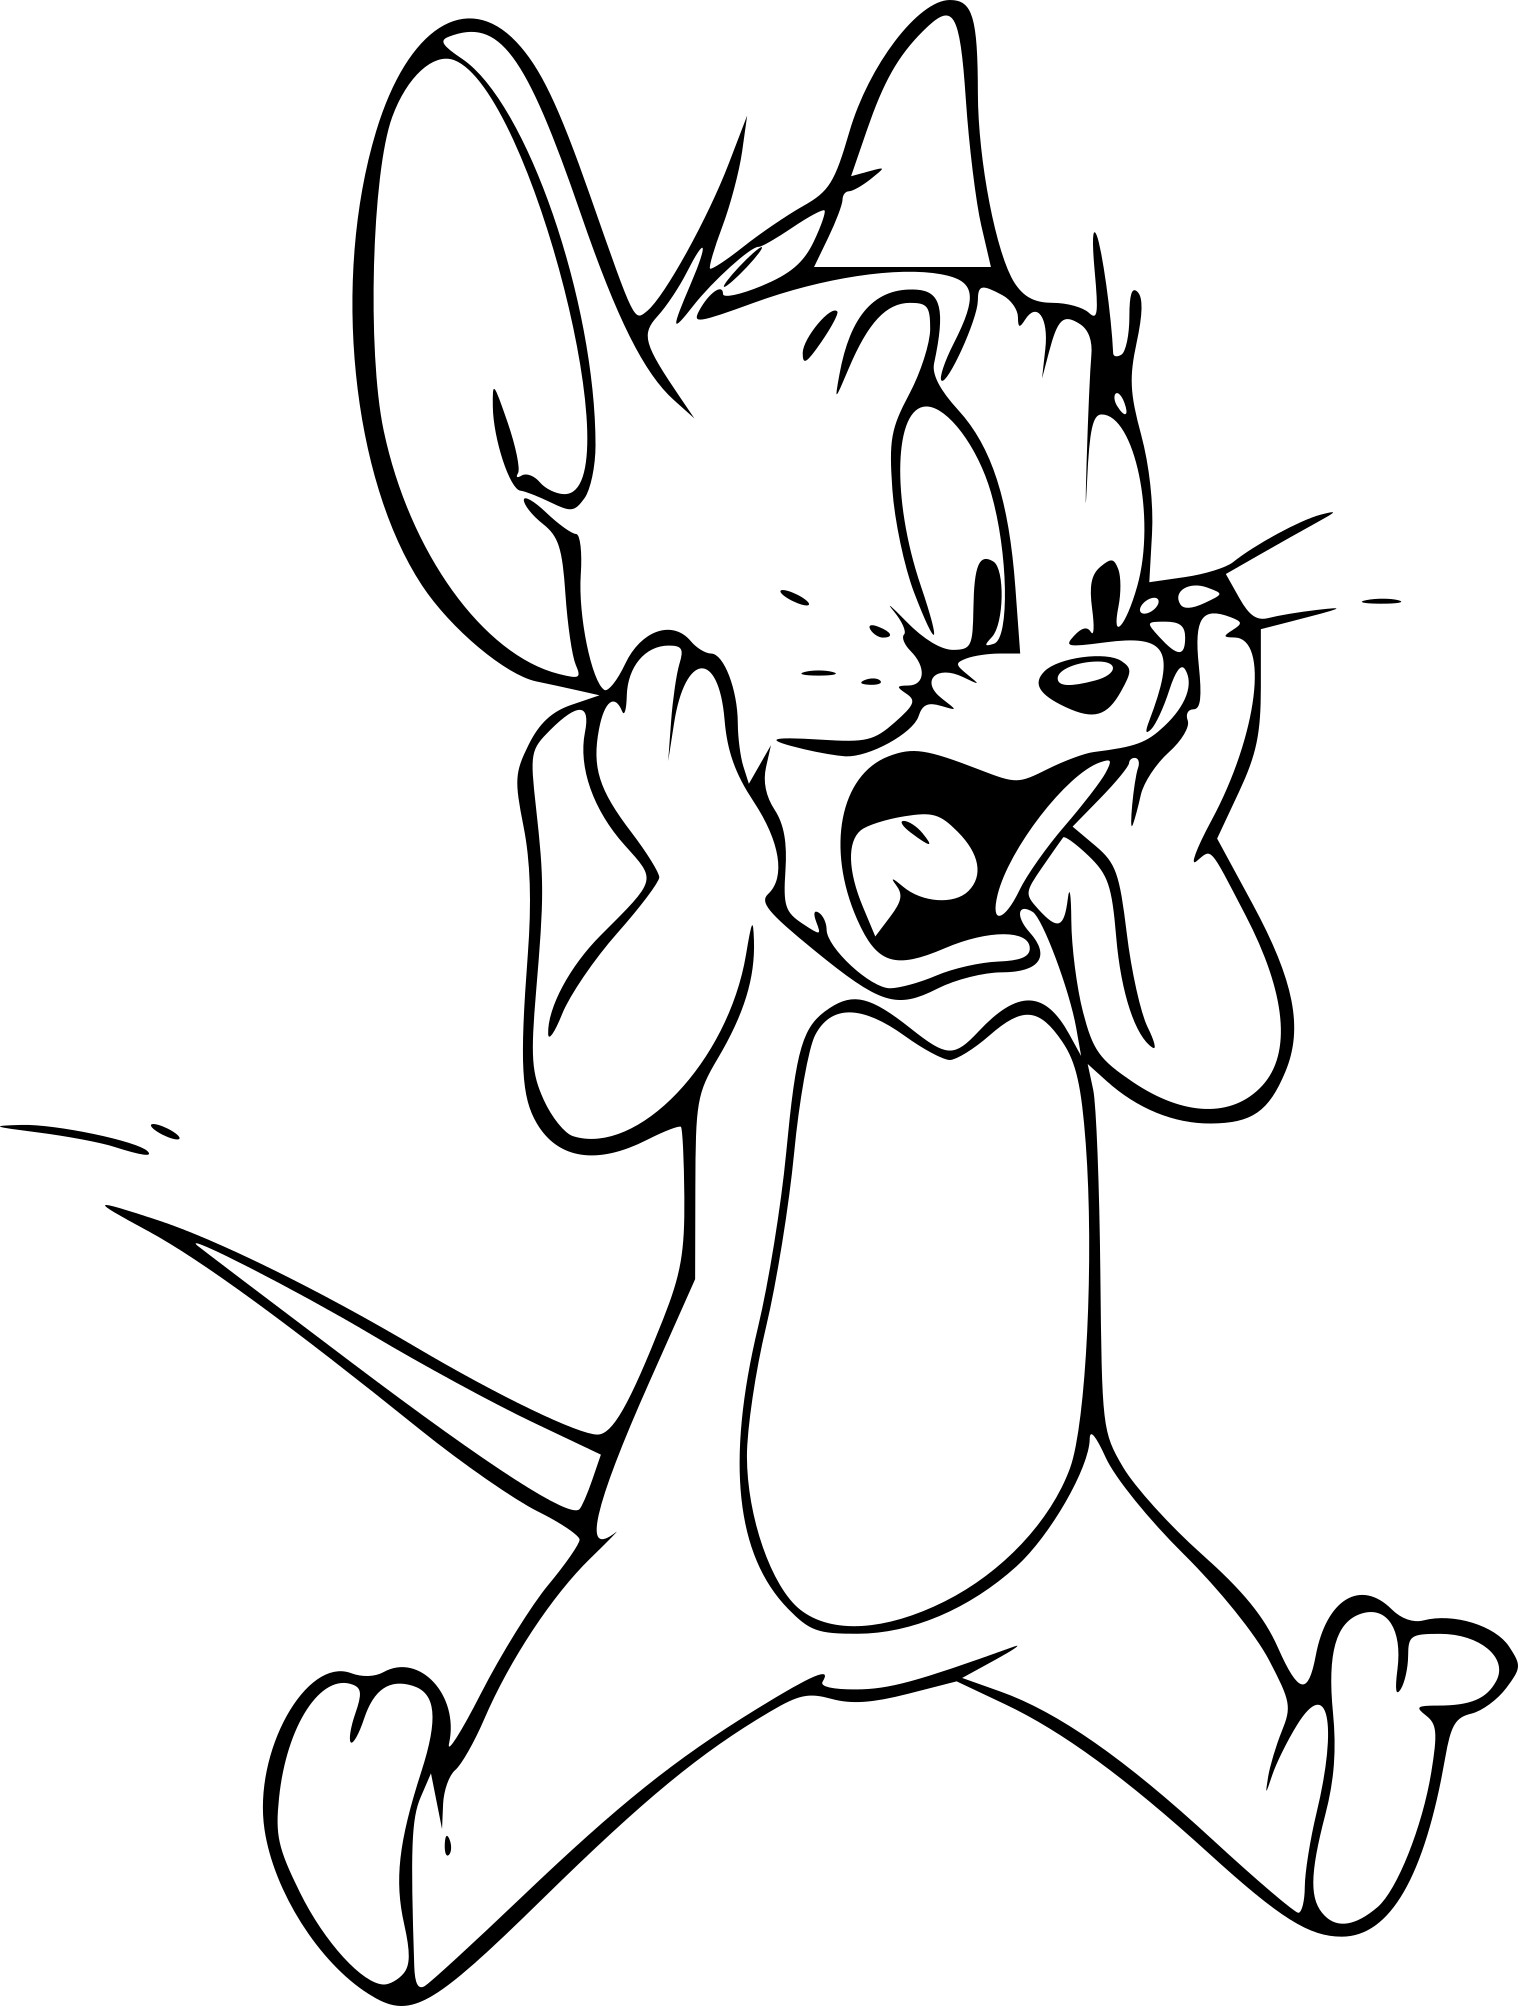 Jerry From Tom And Jerry coloring page